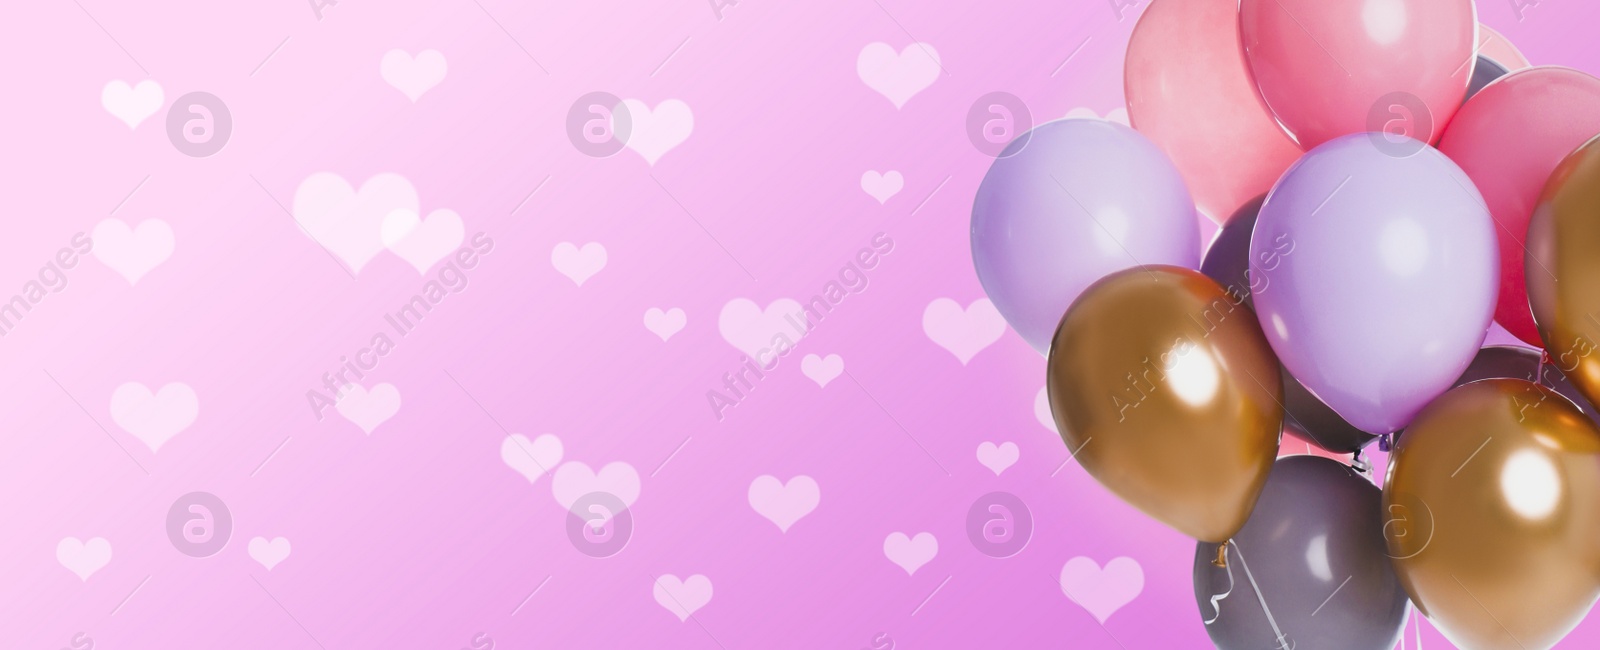 Image of Bright balloons on color background with hearts, space for text. Banner design